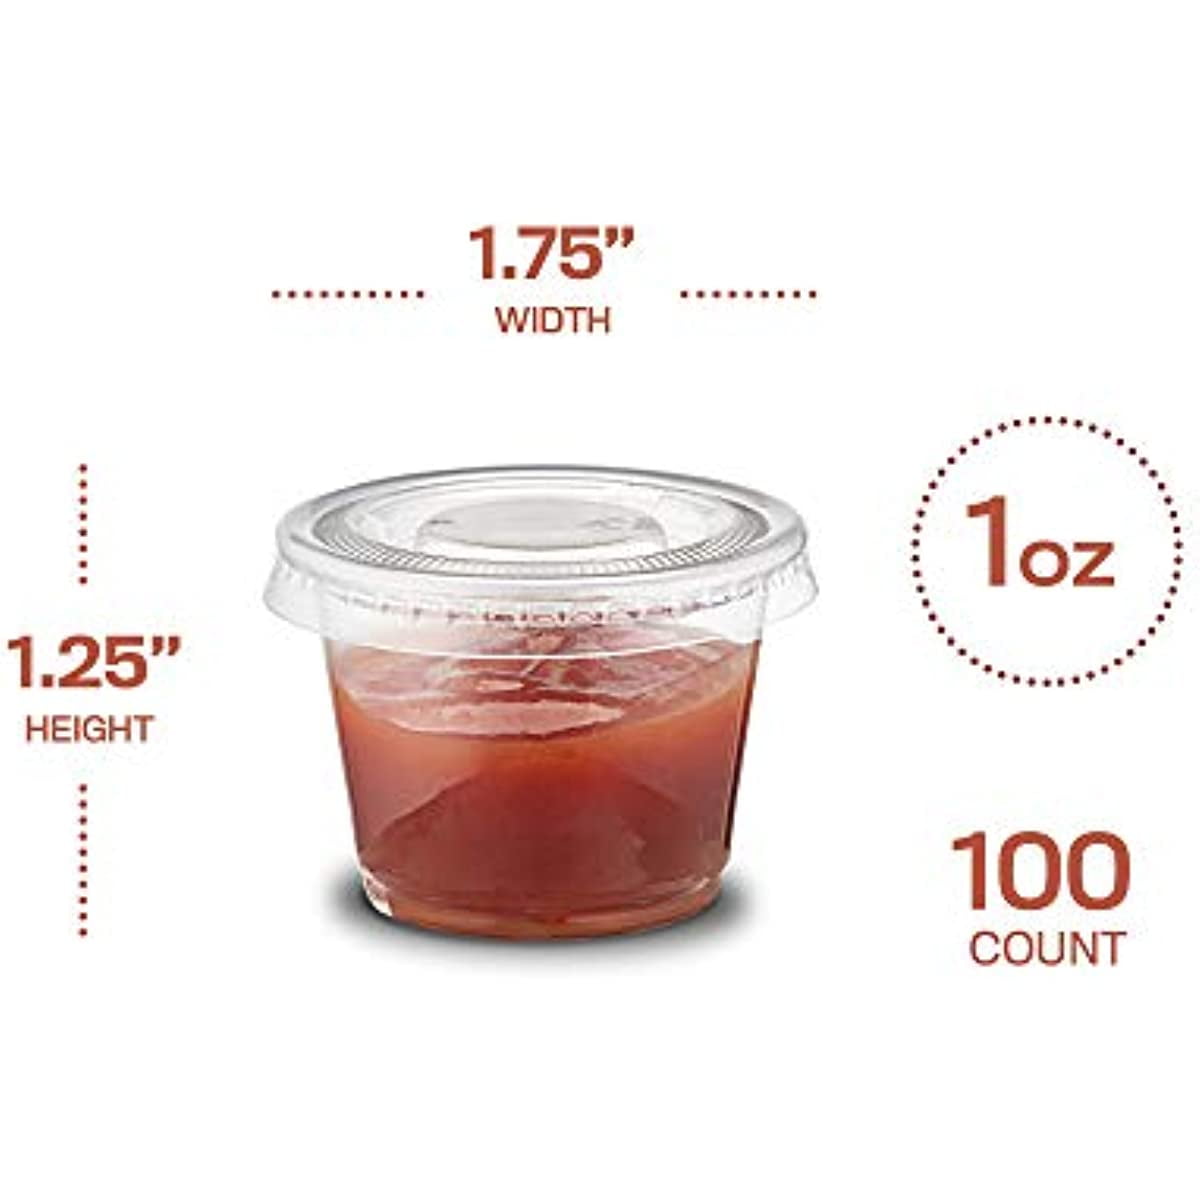 100 Ct 1 Oz Clear Plastic Portion Cups, Jello Shot Condiment Sauce Dip  Party Mixing Sampling, BPA Free Made in USA, Reusable & Disposable 